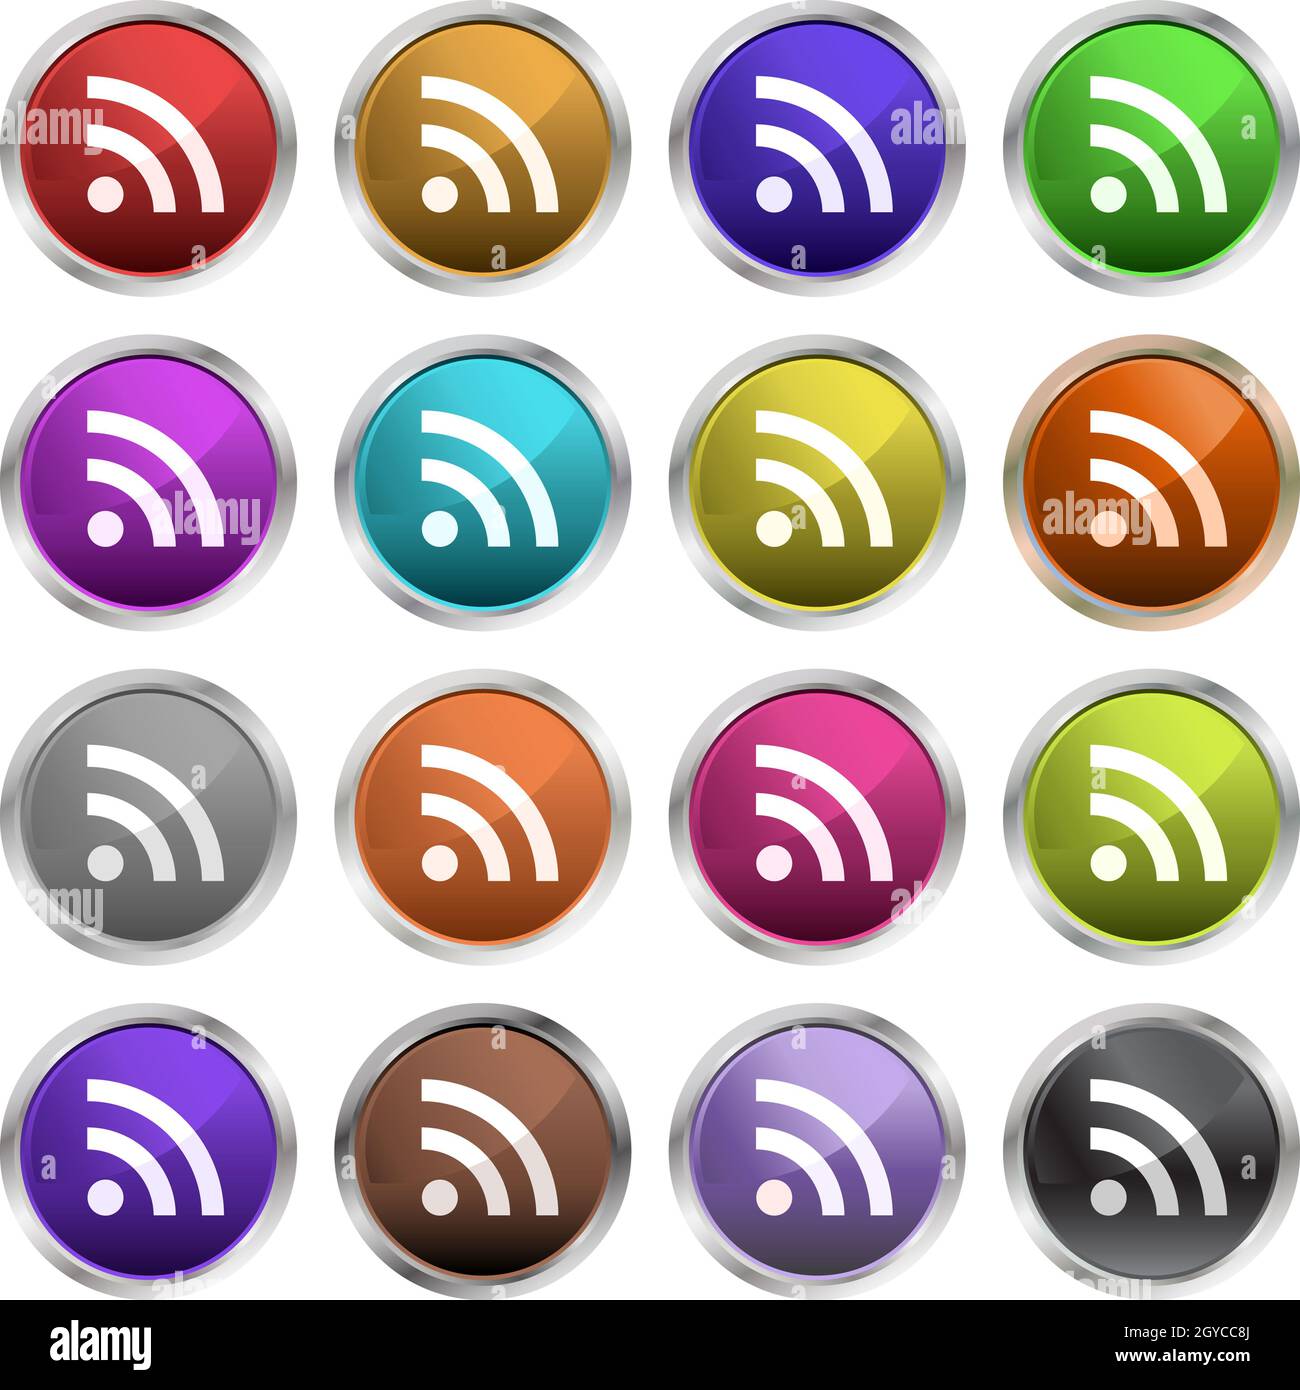 Glossy RSS icons Stock Photo